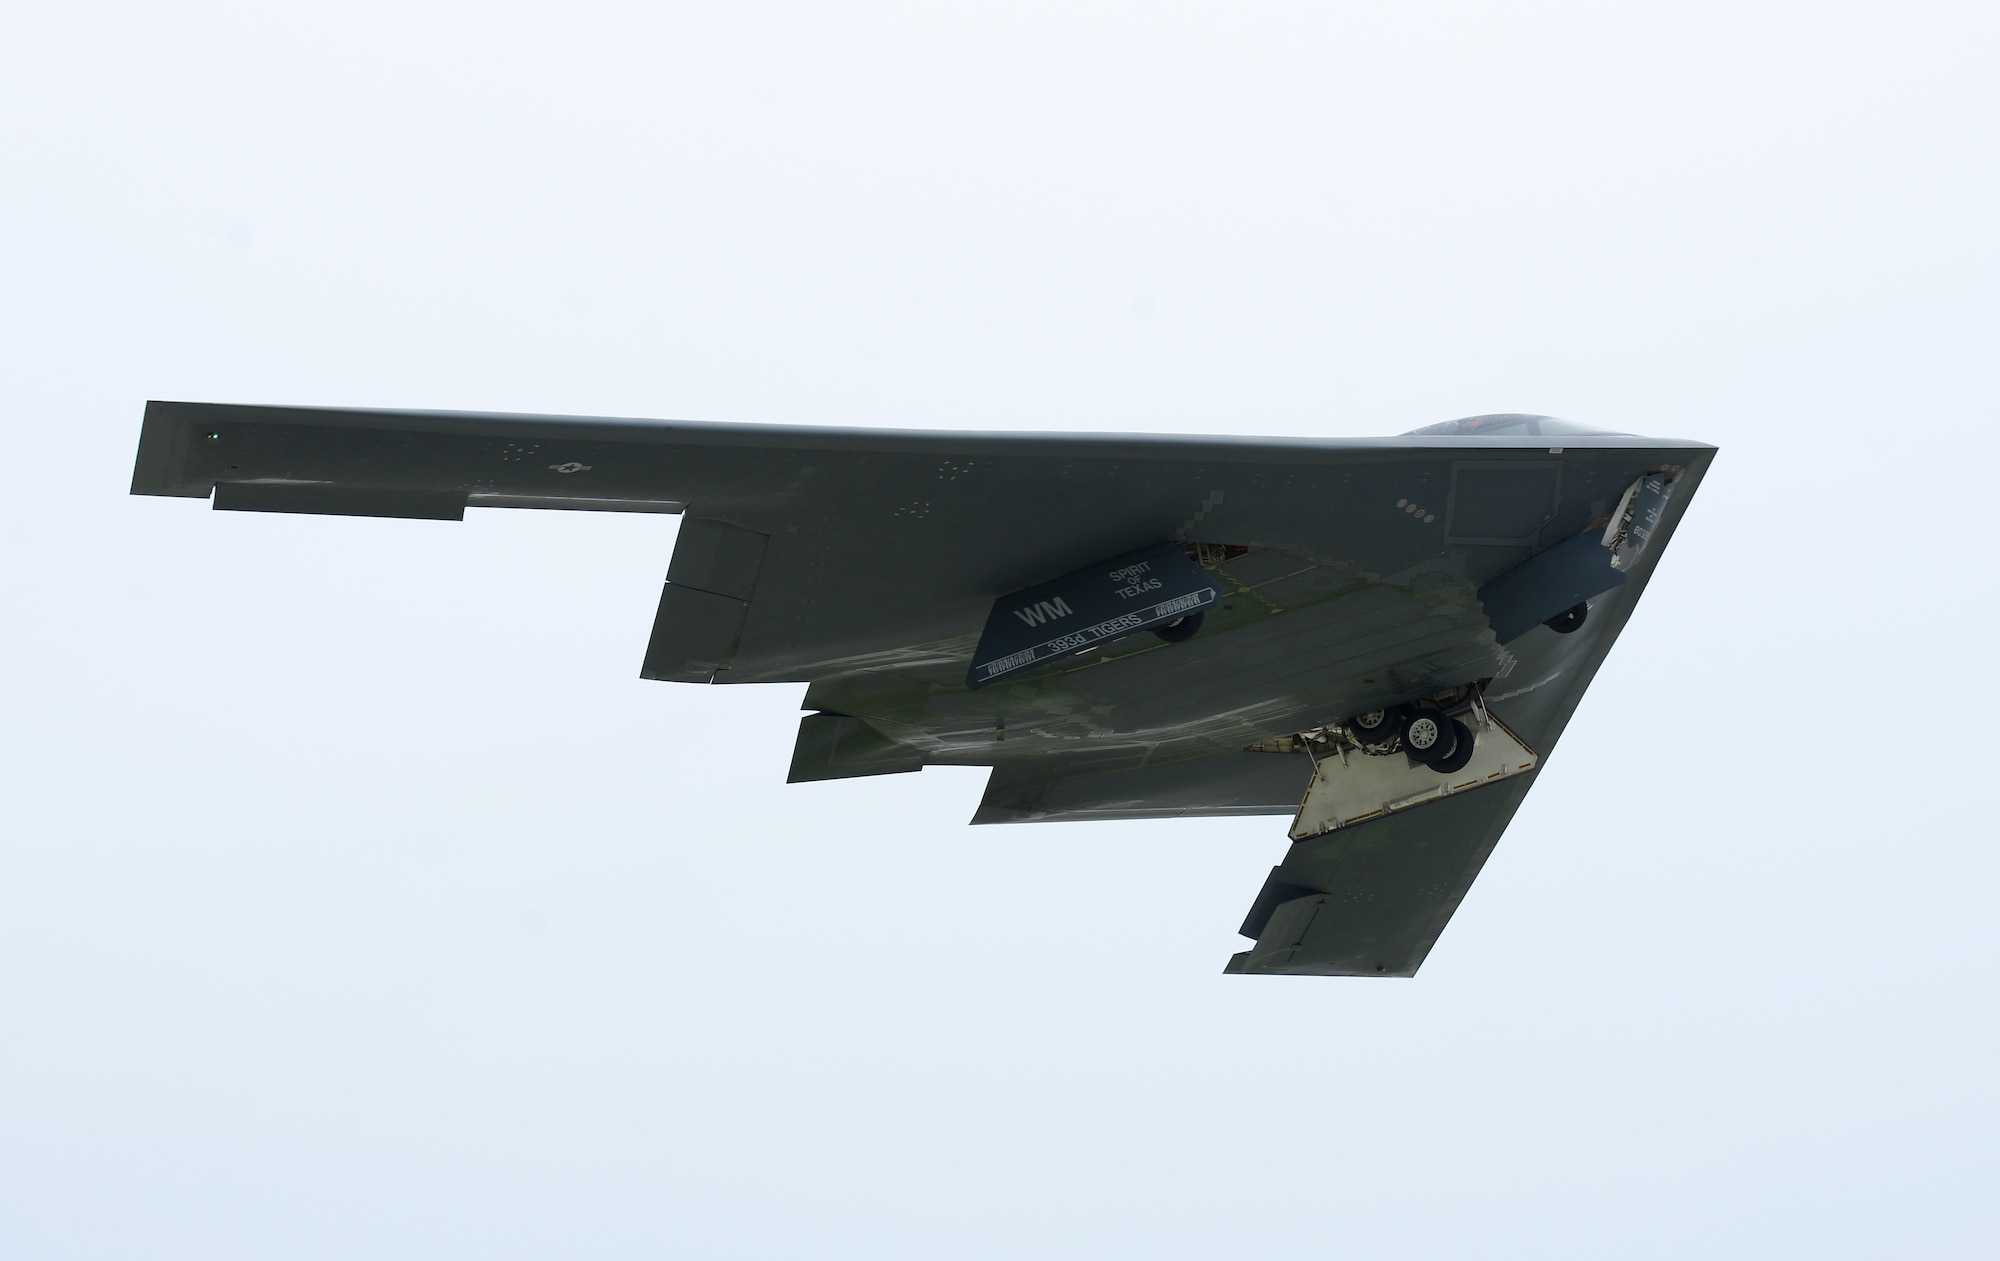 A U.S. Air Force B-2 Spirit takes off at Andersen Air Force Base, Guam, for an integrated bomber operation Aug.17, 2016. This mission marks the first time in history that all three of Air Force Global Strike Command's strategic bomber aircraft are simultaneously conducting integrated operations in the U.S. Pacific Command area of operations. As of Aug. 15, the B-1 Lancer will be temporarily deployed to Guam in support of U.S. Pacific Command's Continuous Bomber Presence mission. (U.S. Air Force photo by Airman 1st Class Arielle Vasquez/Released)